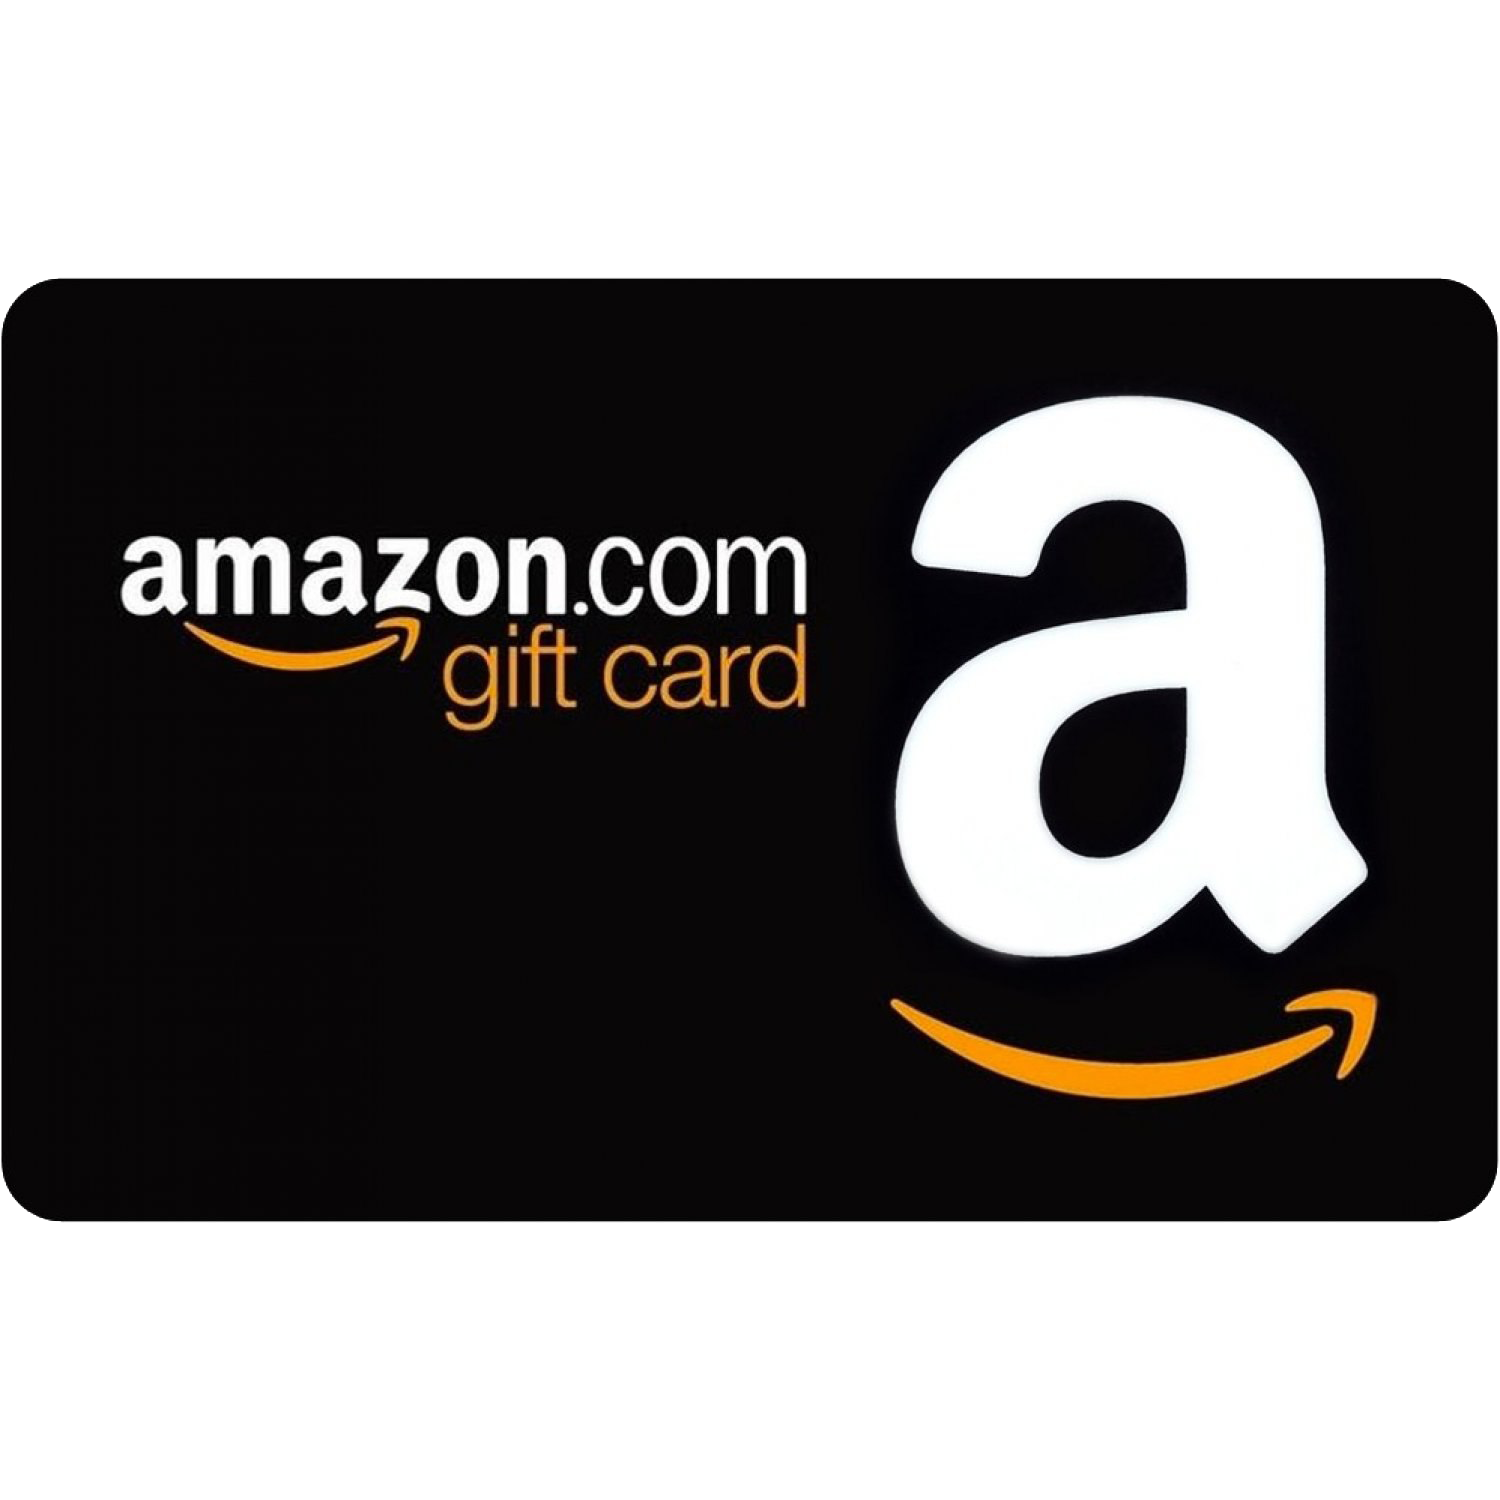 Amazon Gift Card Voucher PNG Image